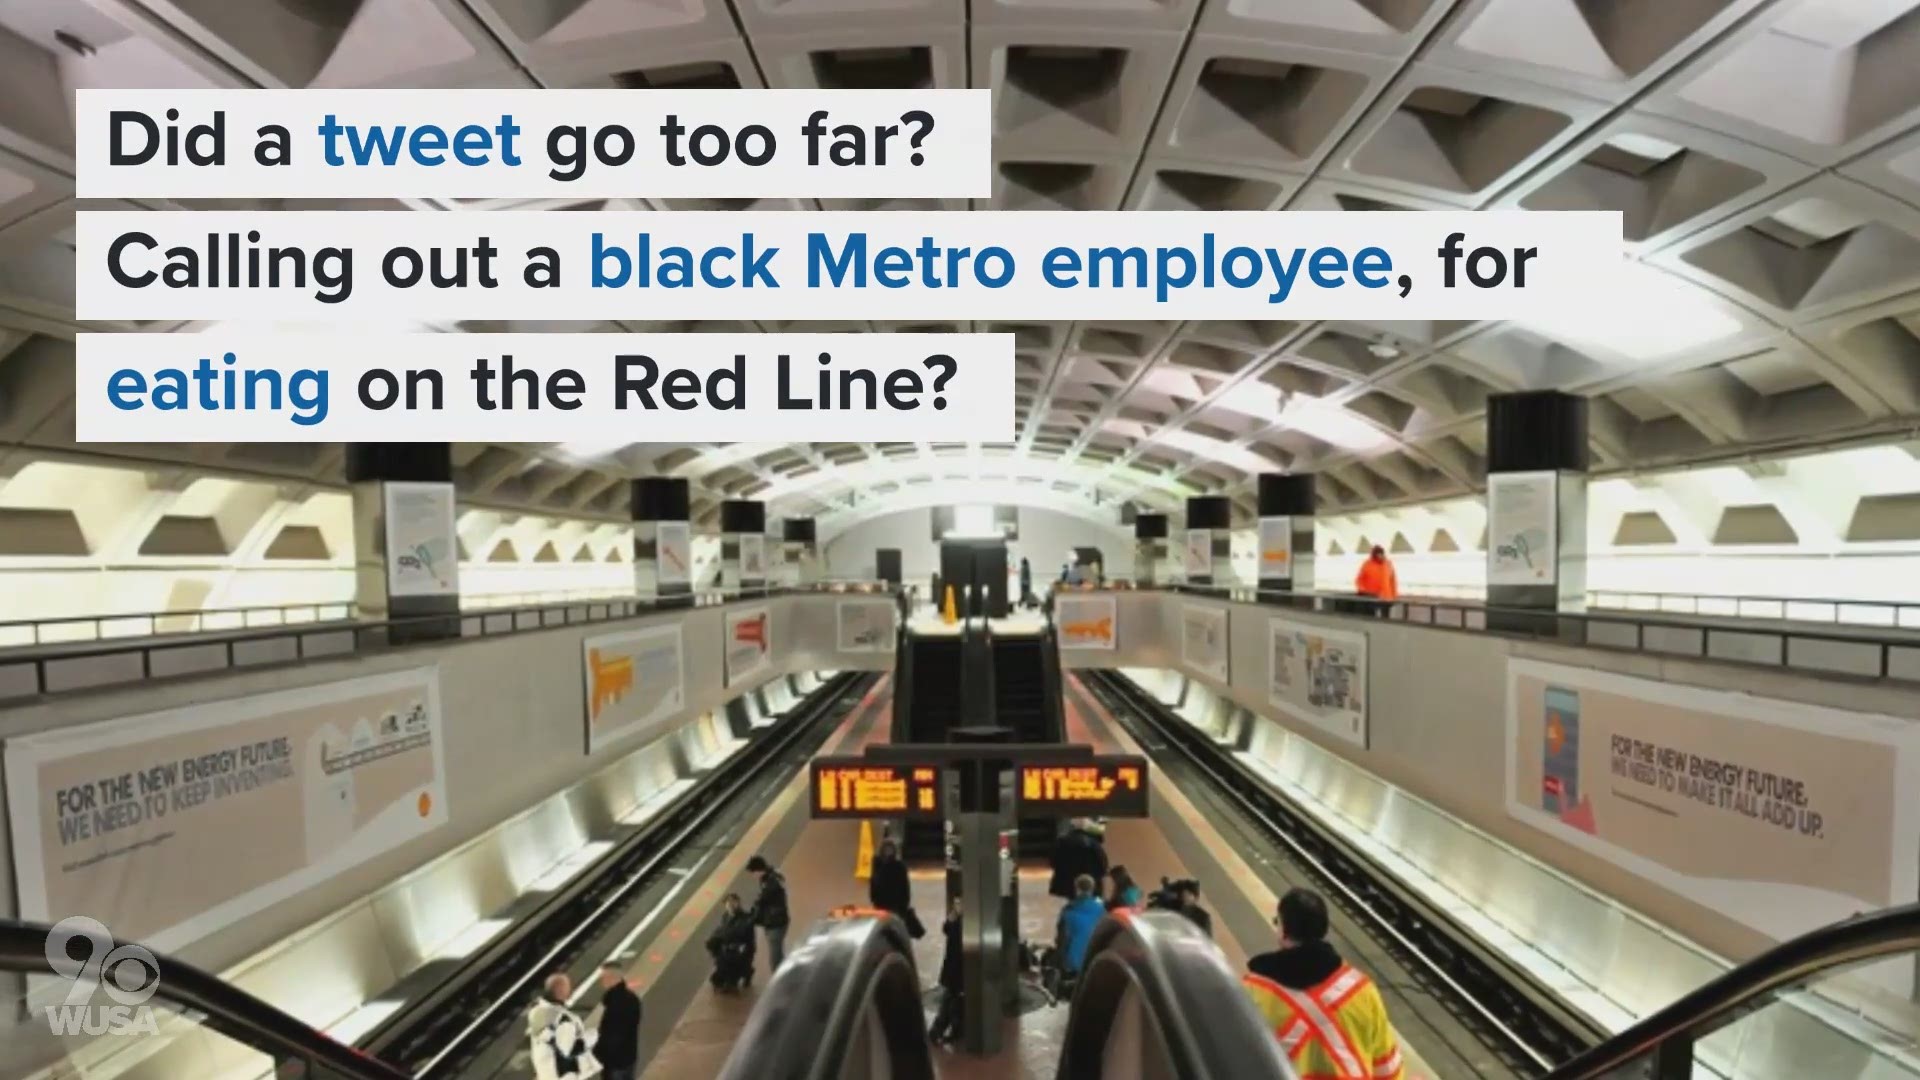 A Twitter user called out a black Metro employee for eating on the Red Line. The one with the complaint, not the employee, received the backlash.